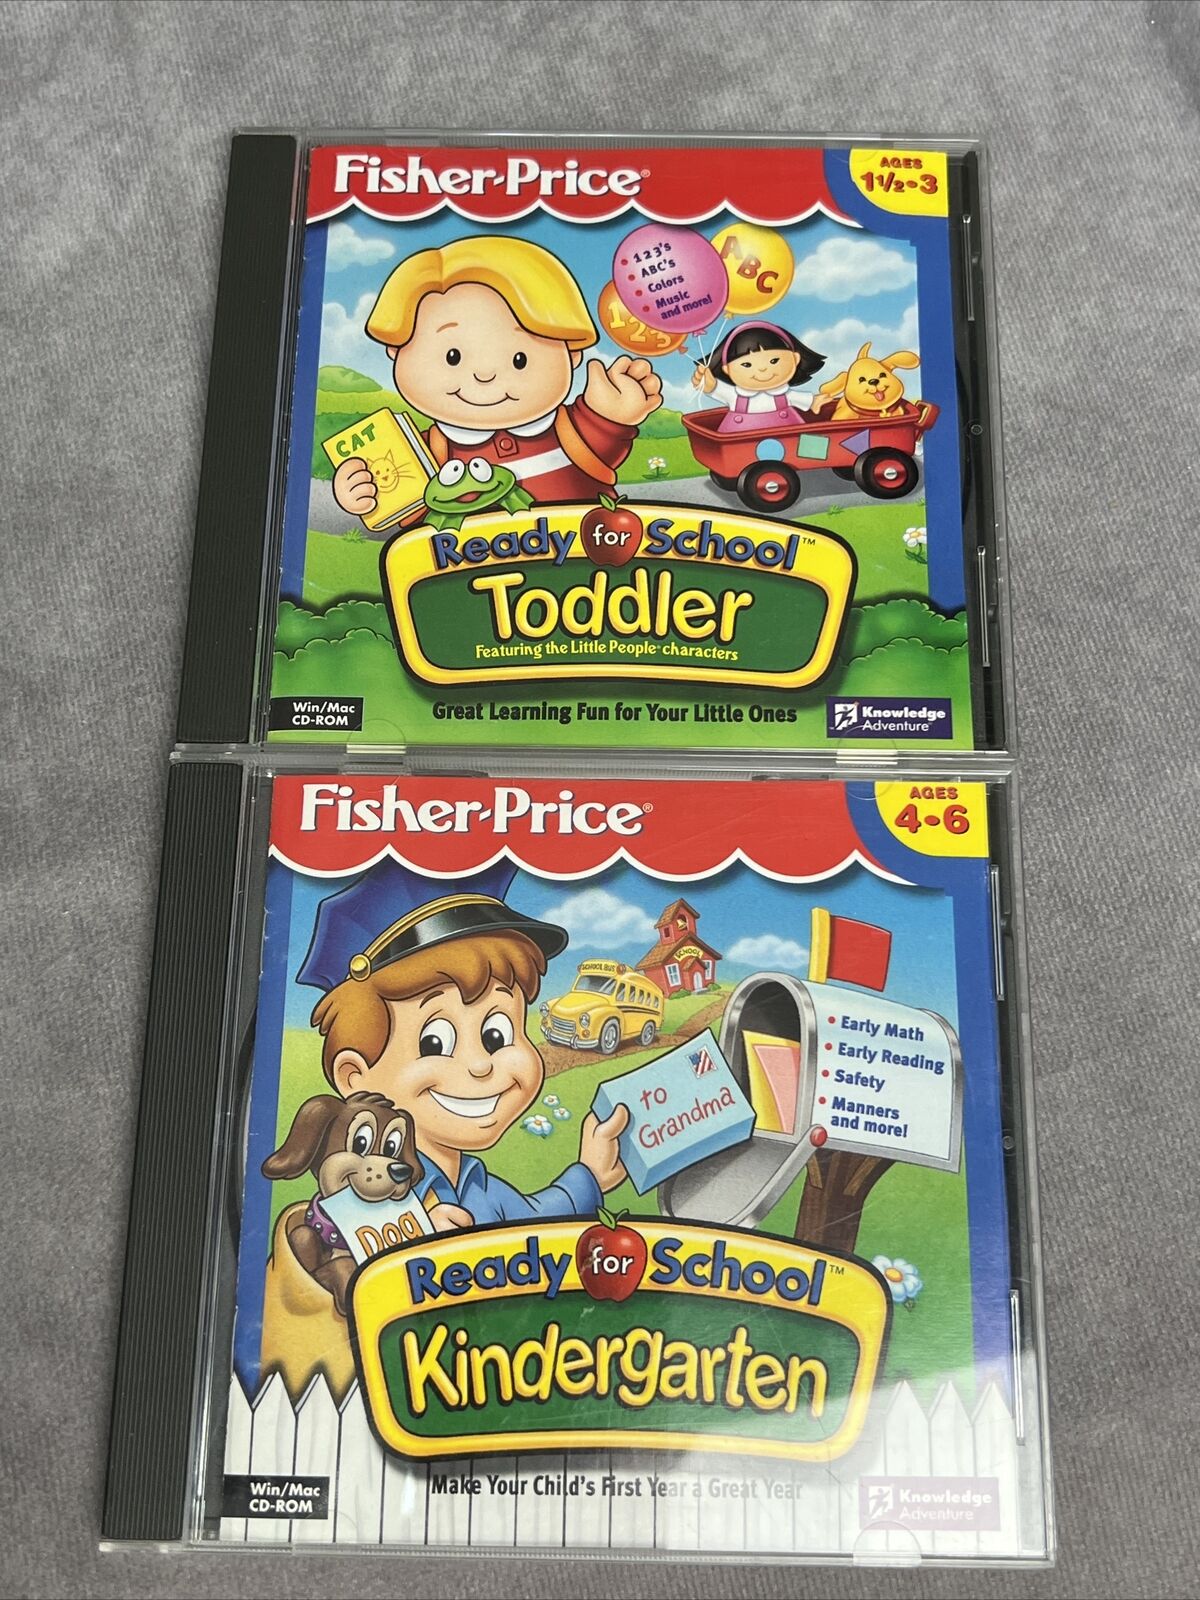 Ready for School Kindergarten & Toddler Fisher-Price ages 1-6 win/mac cd-rom